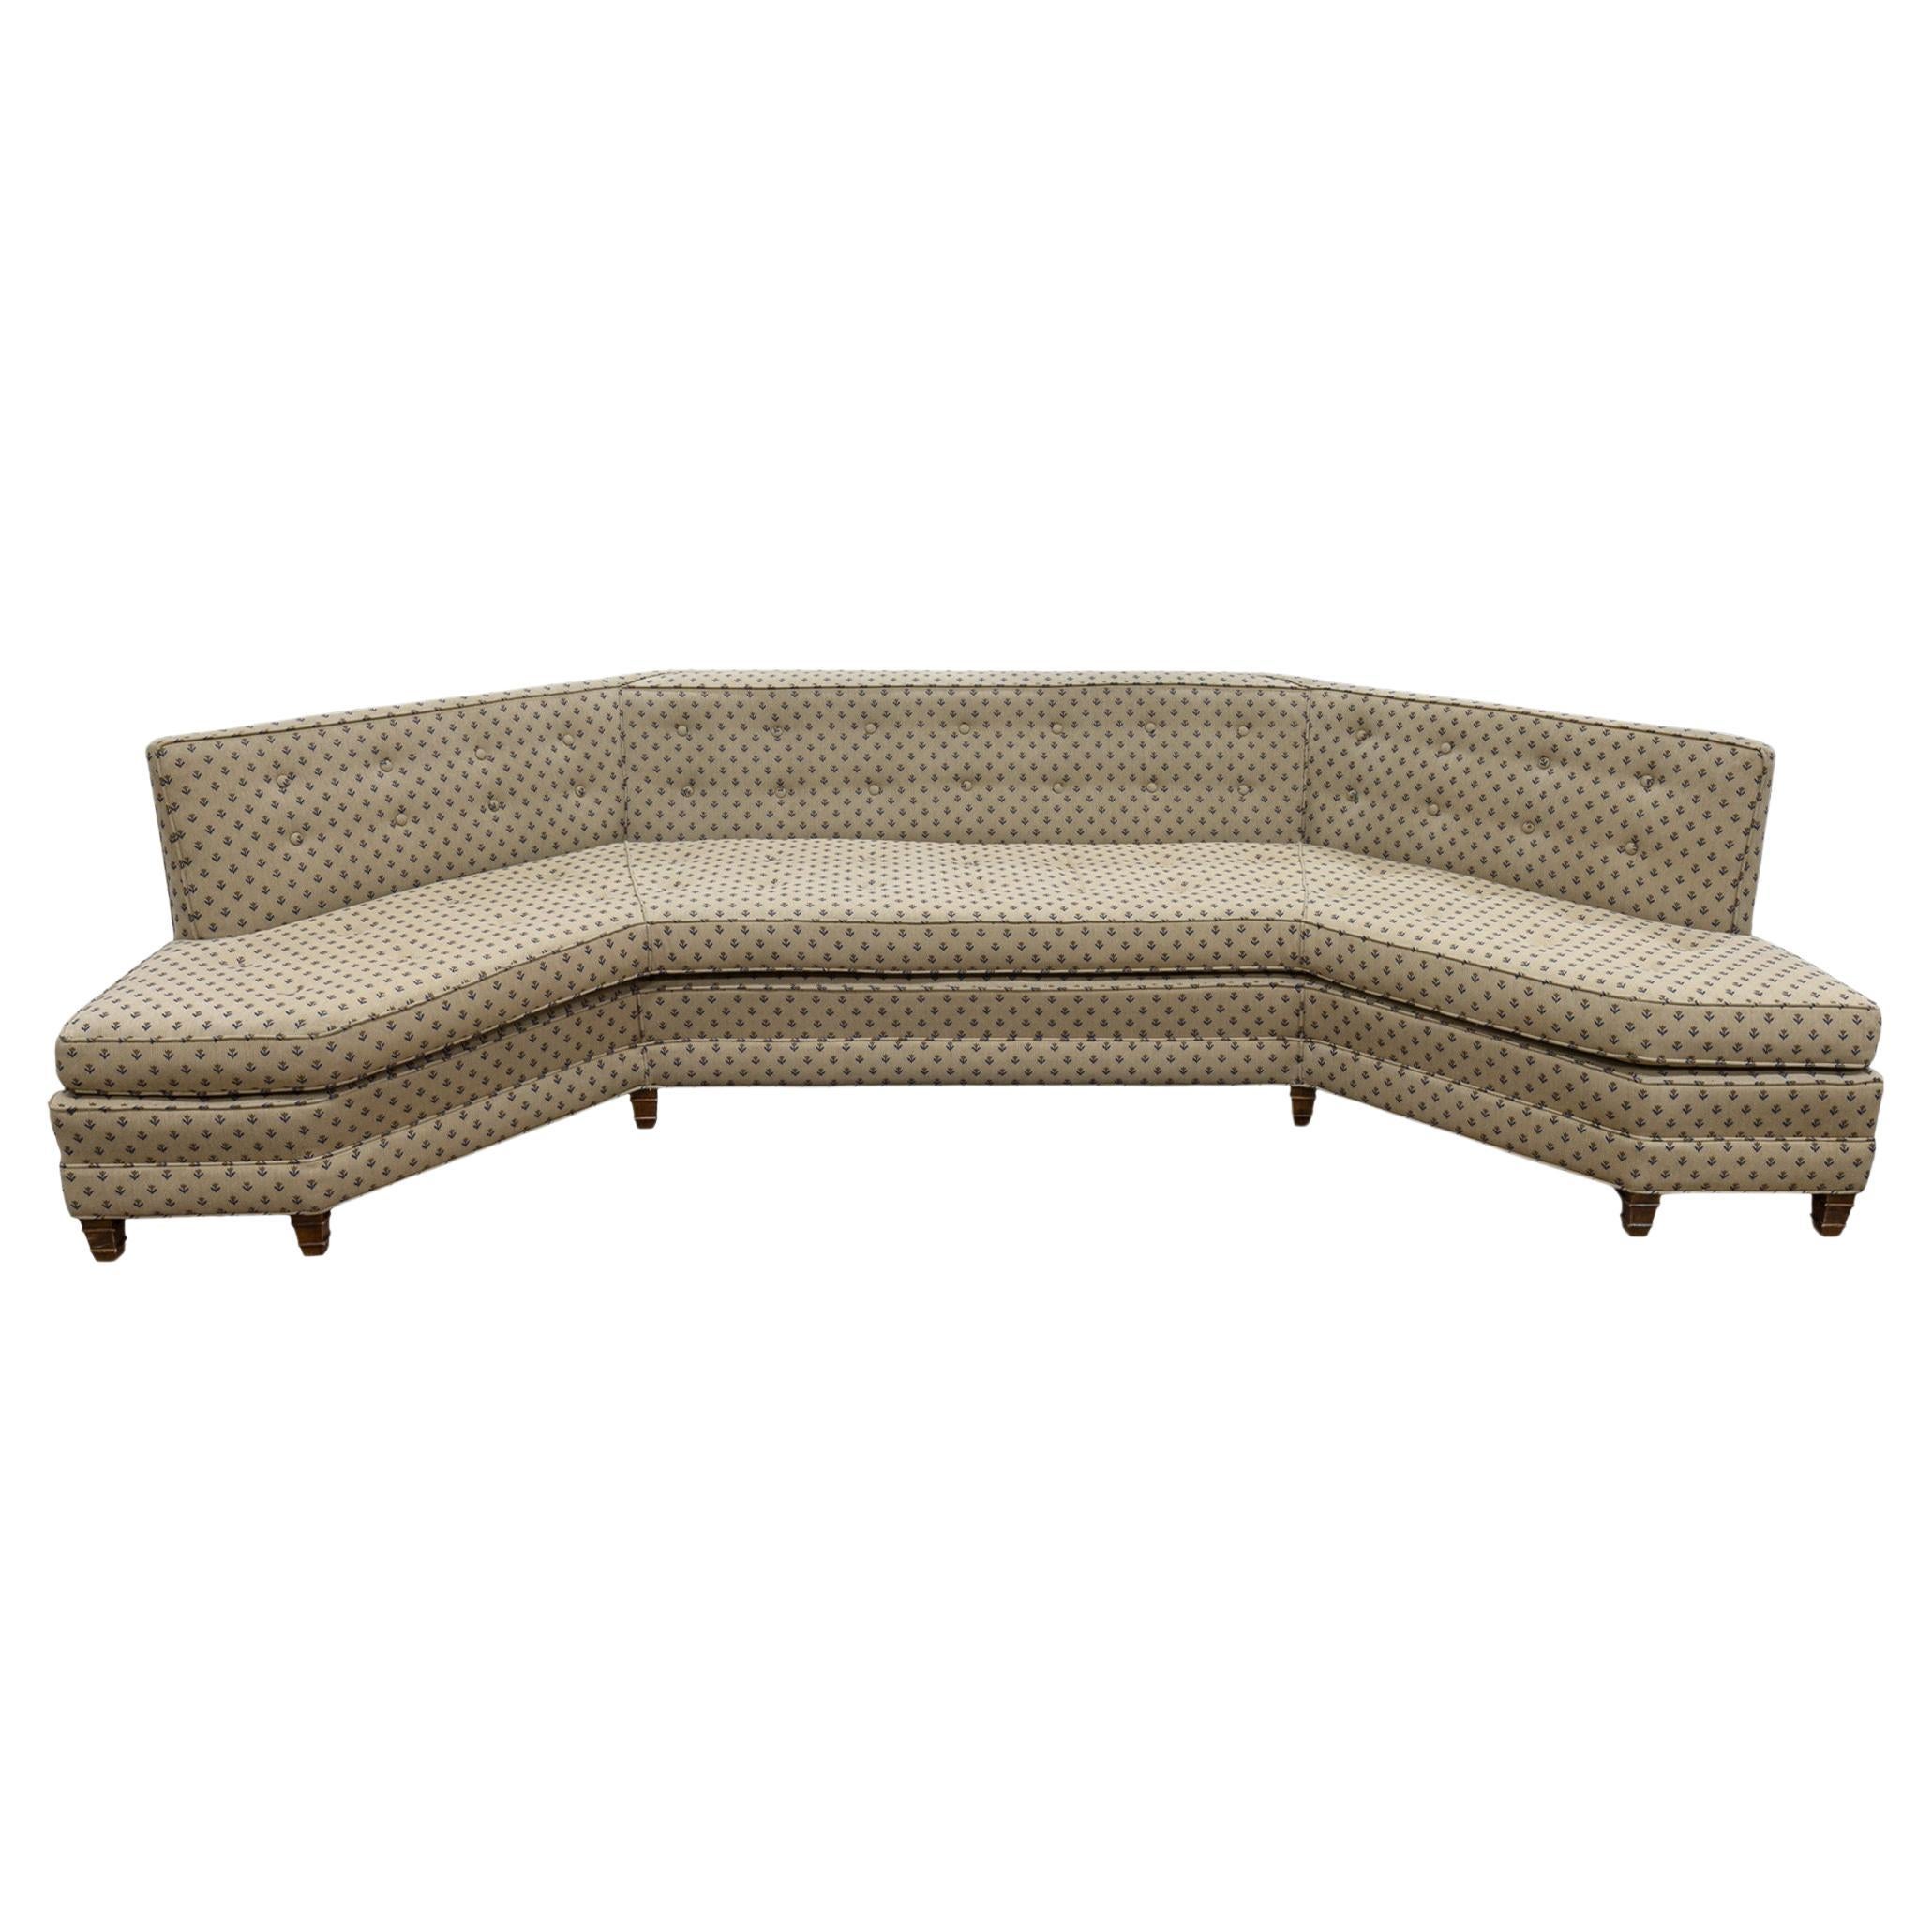 Mid Century Modern Curved Beige Floral Sofa in the Manner of Harvey Probber For Sale